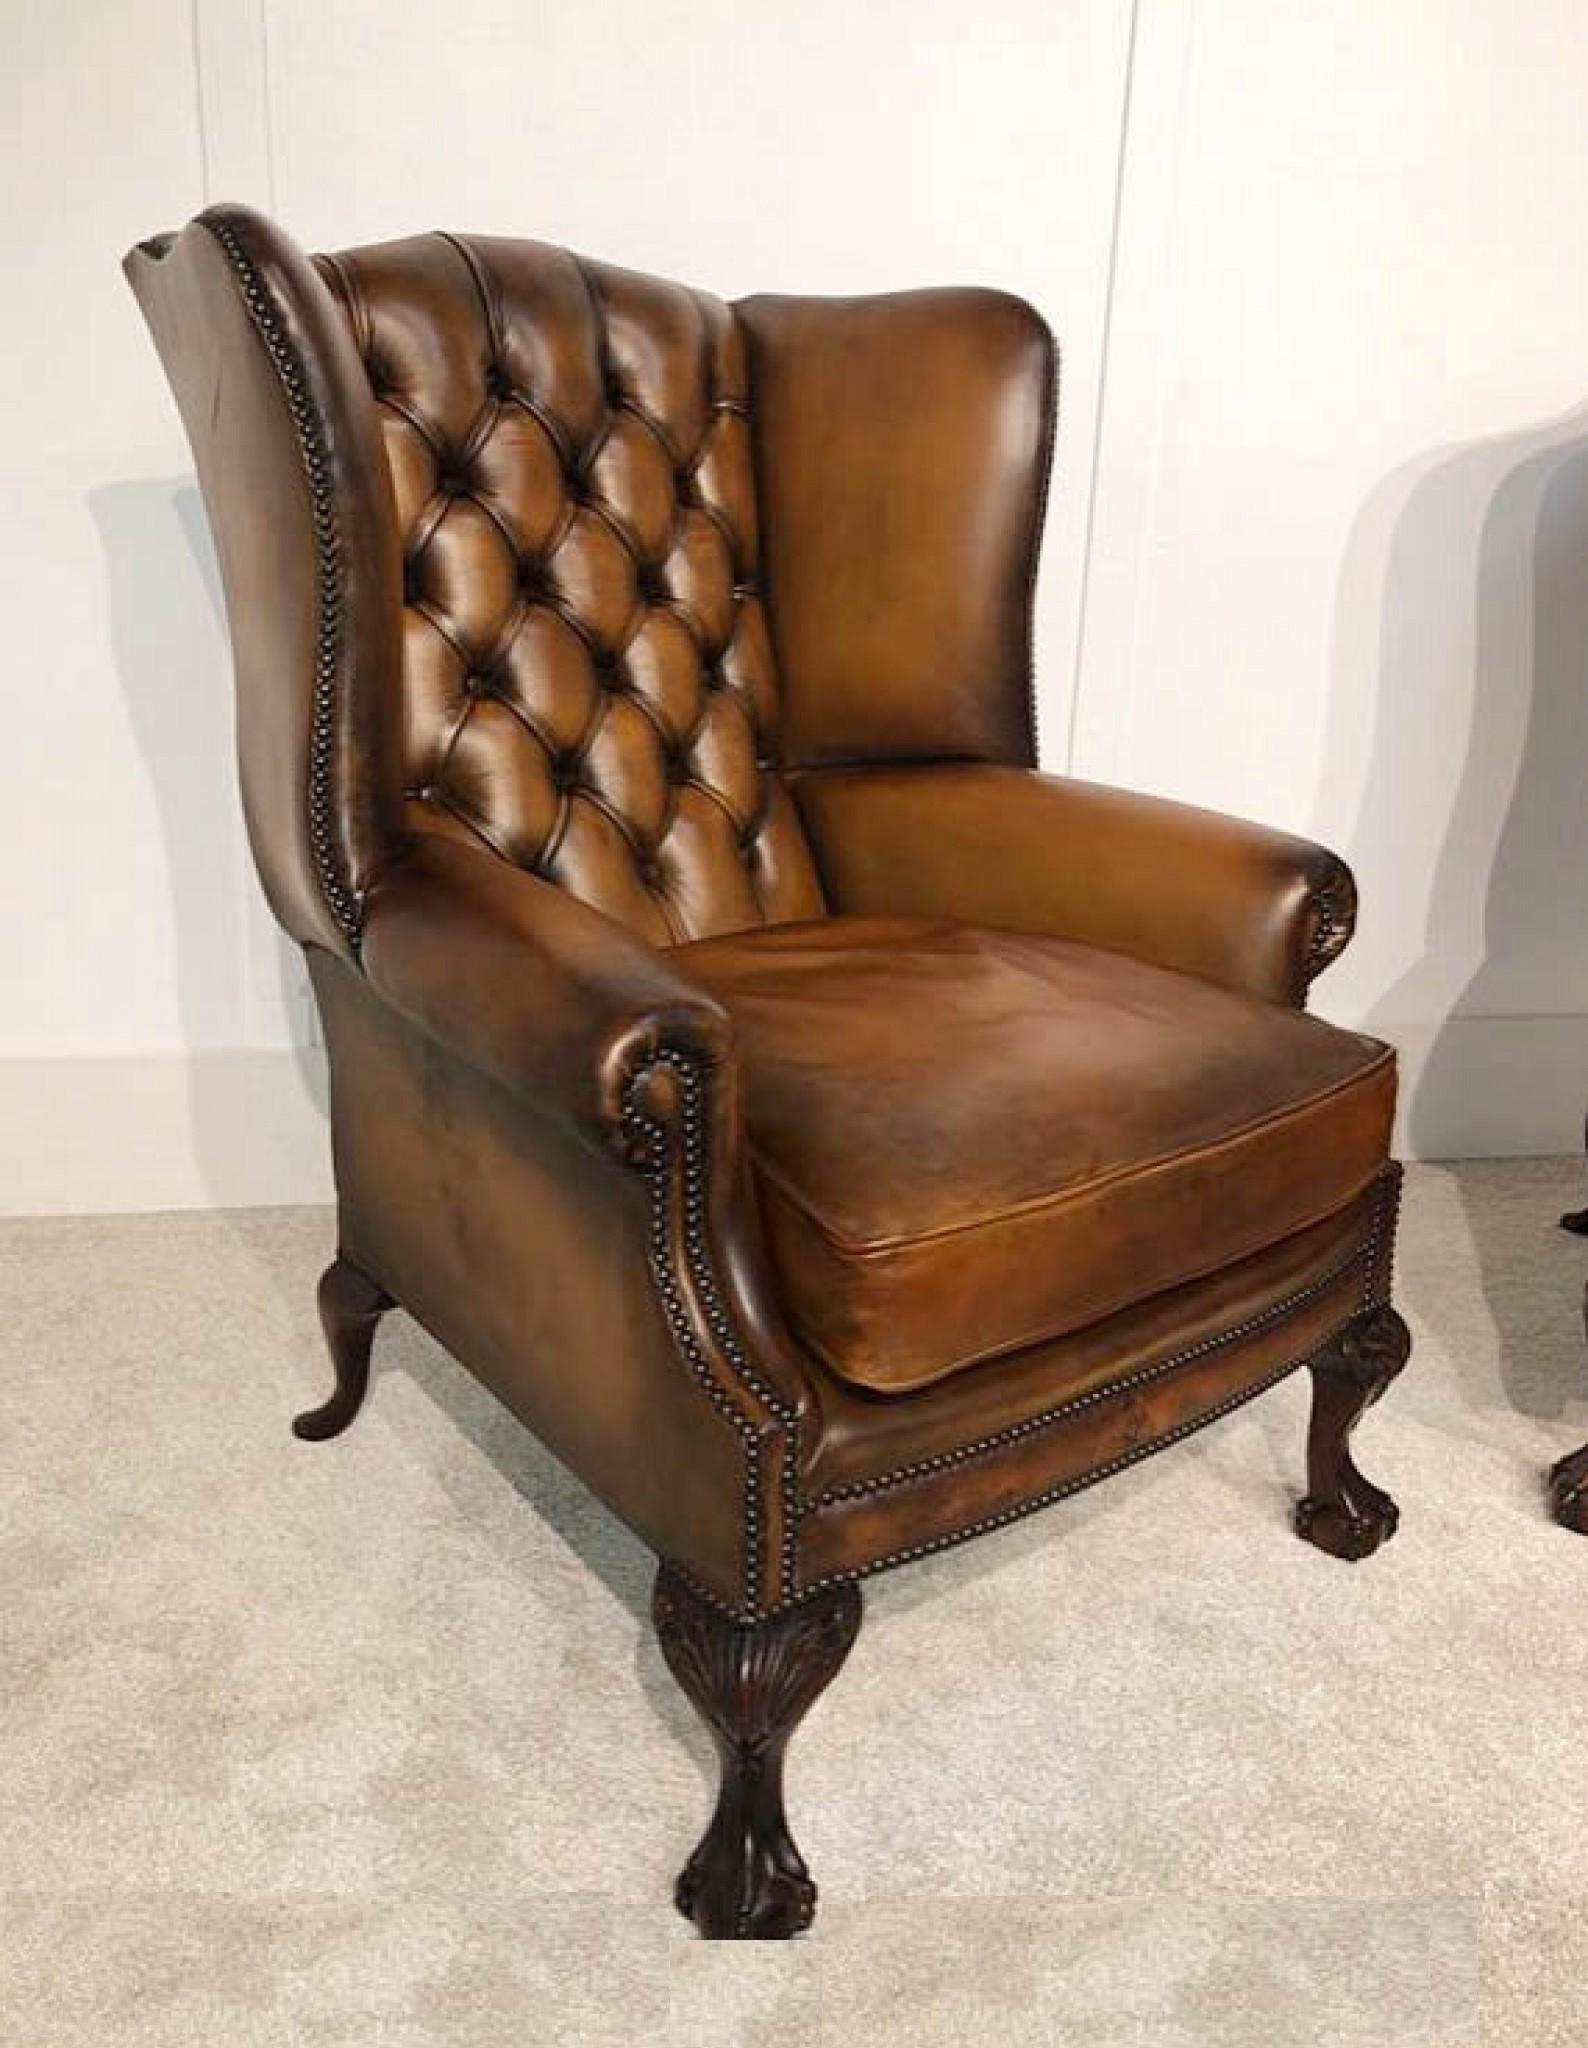 Stunning pair of Victorian style leather wingback chairs
Also referred to as Chesterfields
Perfect gentlemans club look - very comfortable with deep button leather
Hand carved ball and claw feet
Offered in great shape and can ship to anywhere in the